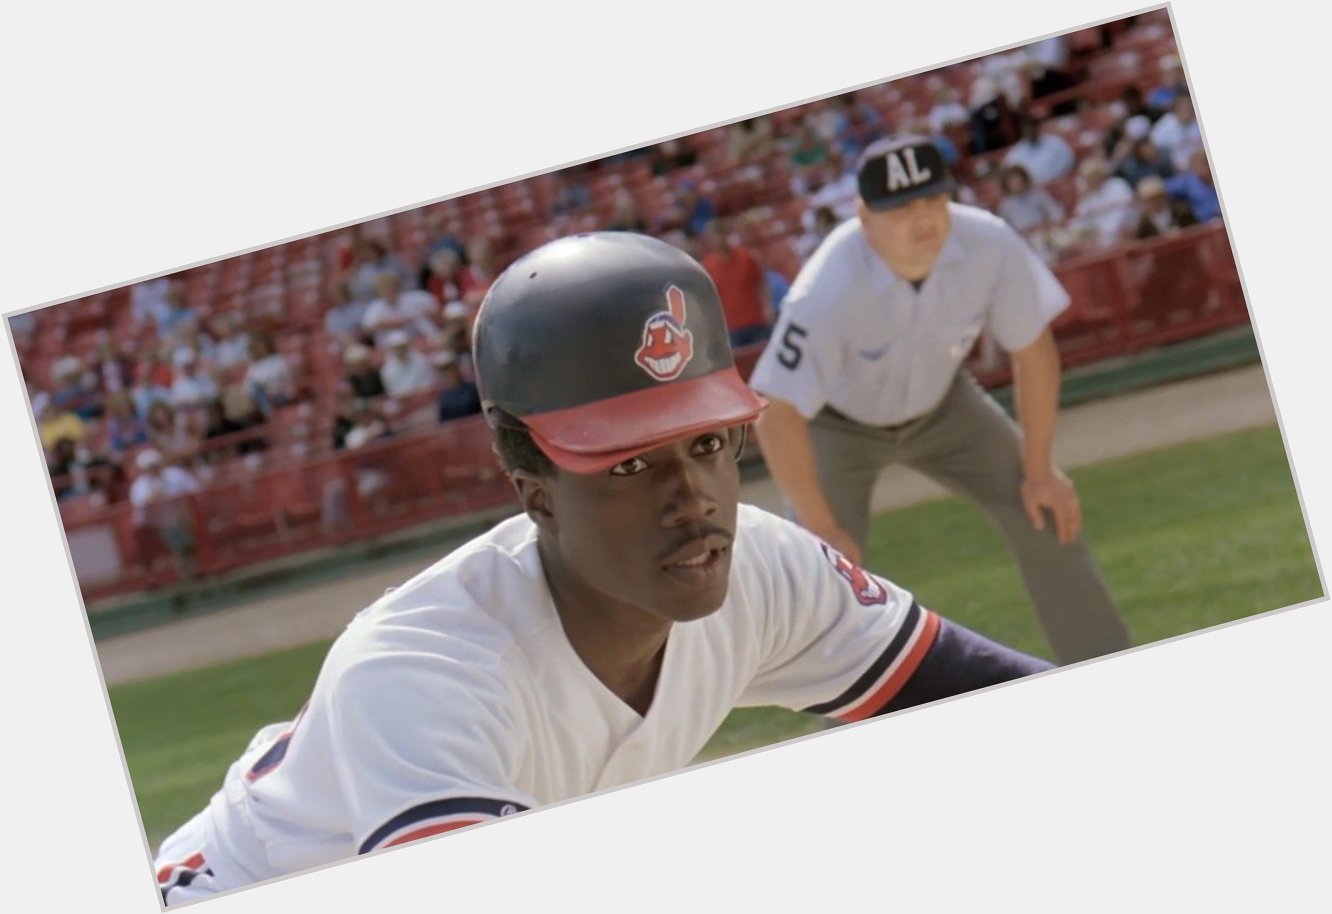 I just saw it was Wesley Snipes\ birthday, so a big Happy Birthday to Willie Mays Hayes... what a ballplayer. 